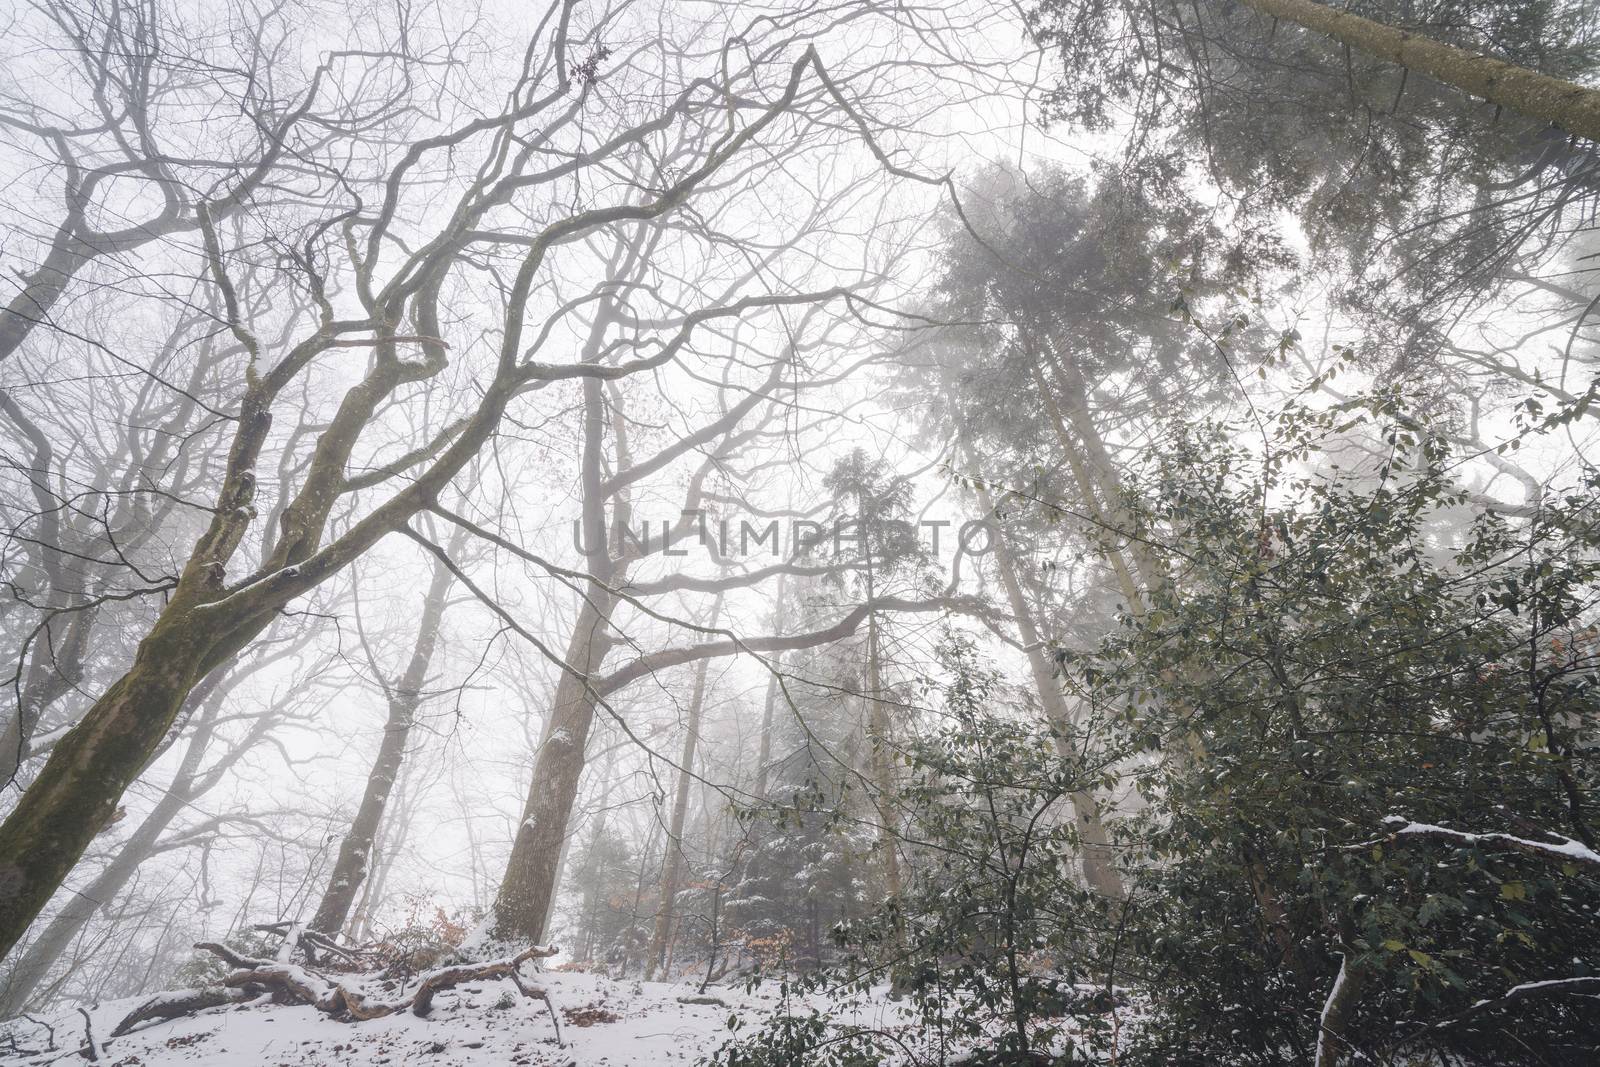 Misty forest in the winter with tall trees by Sportactive